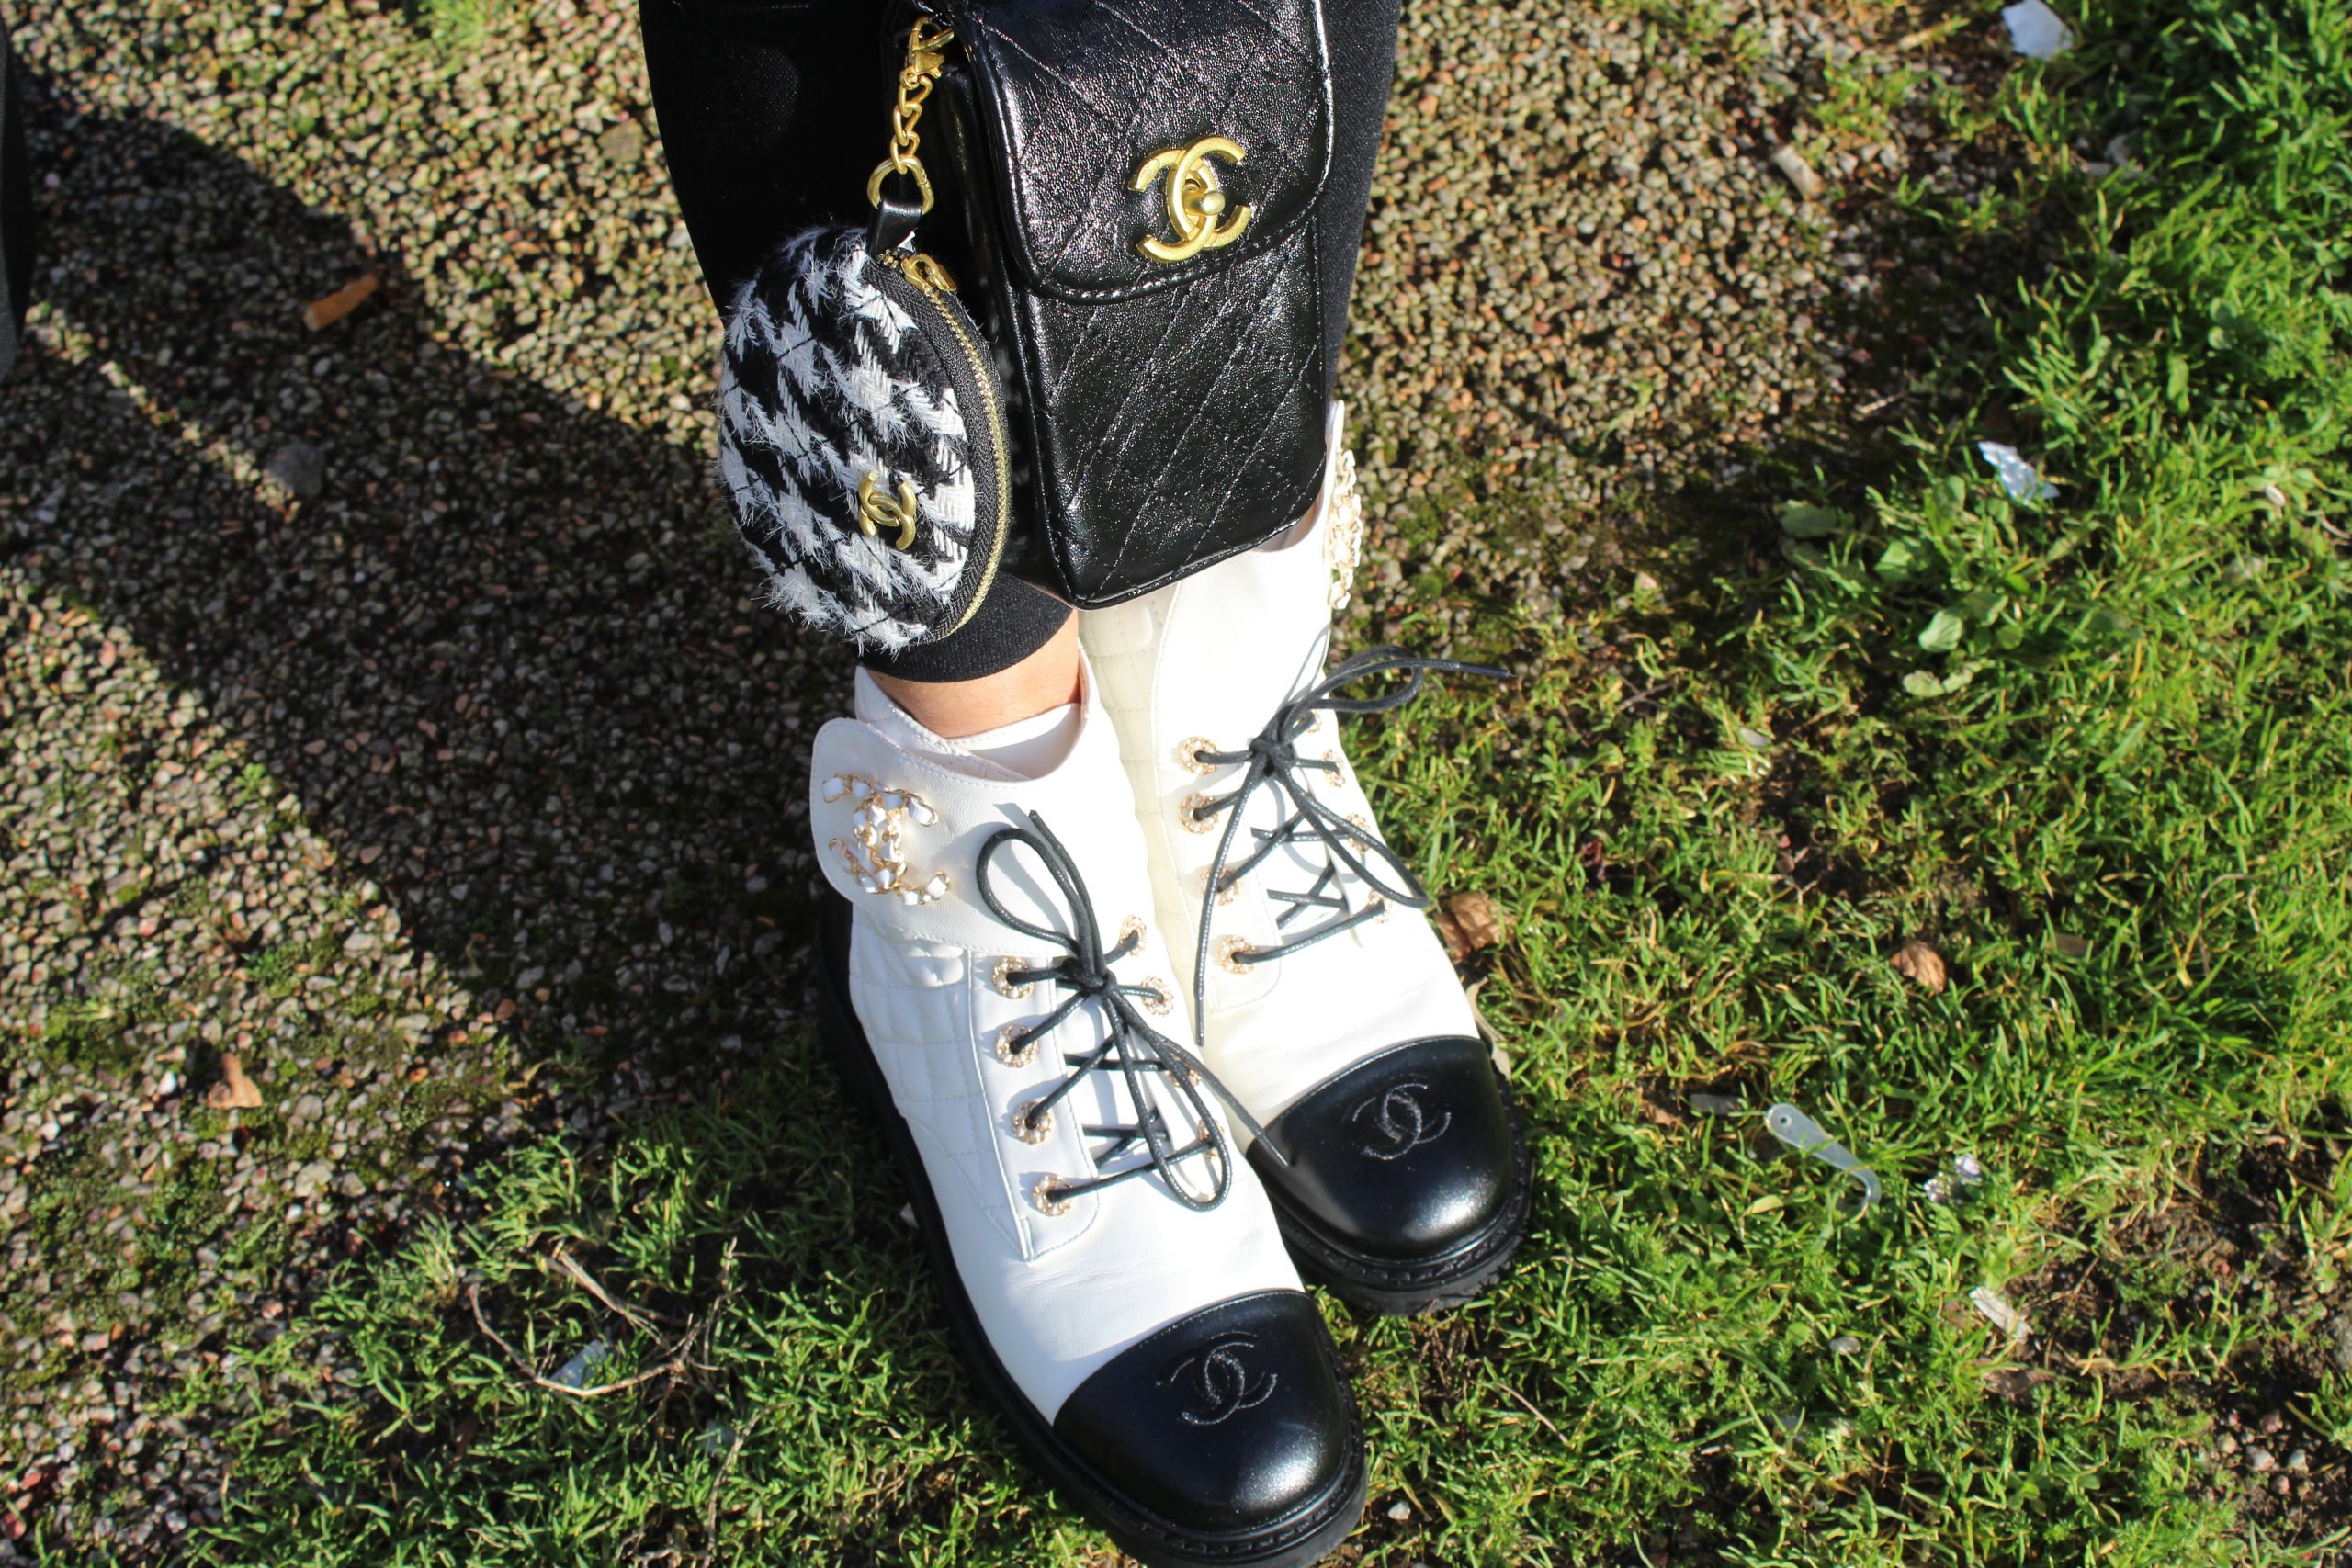 black and white chanel and dior outfit accessories Paola Lauretano